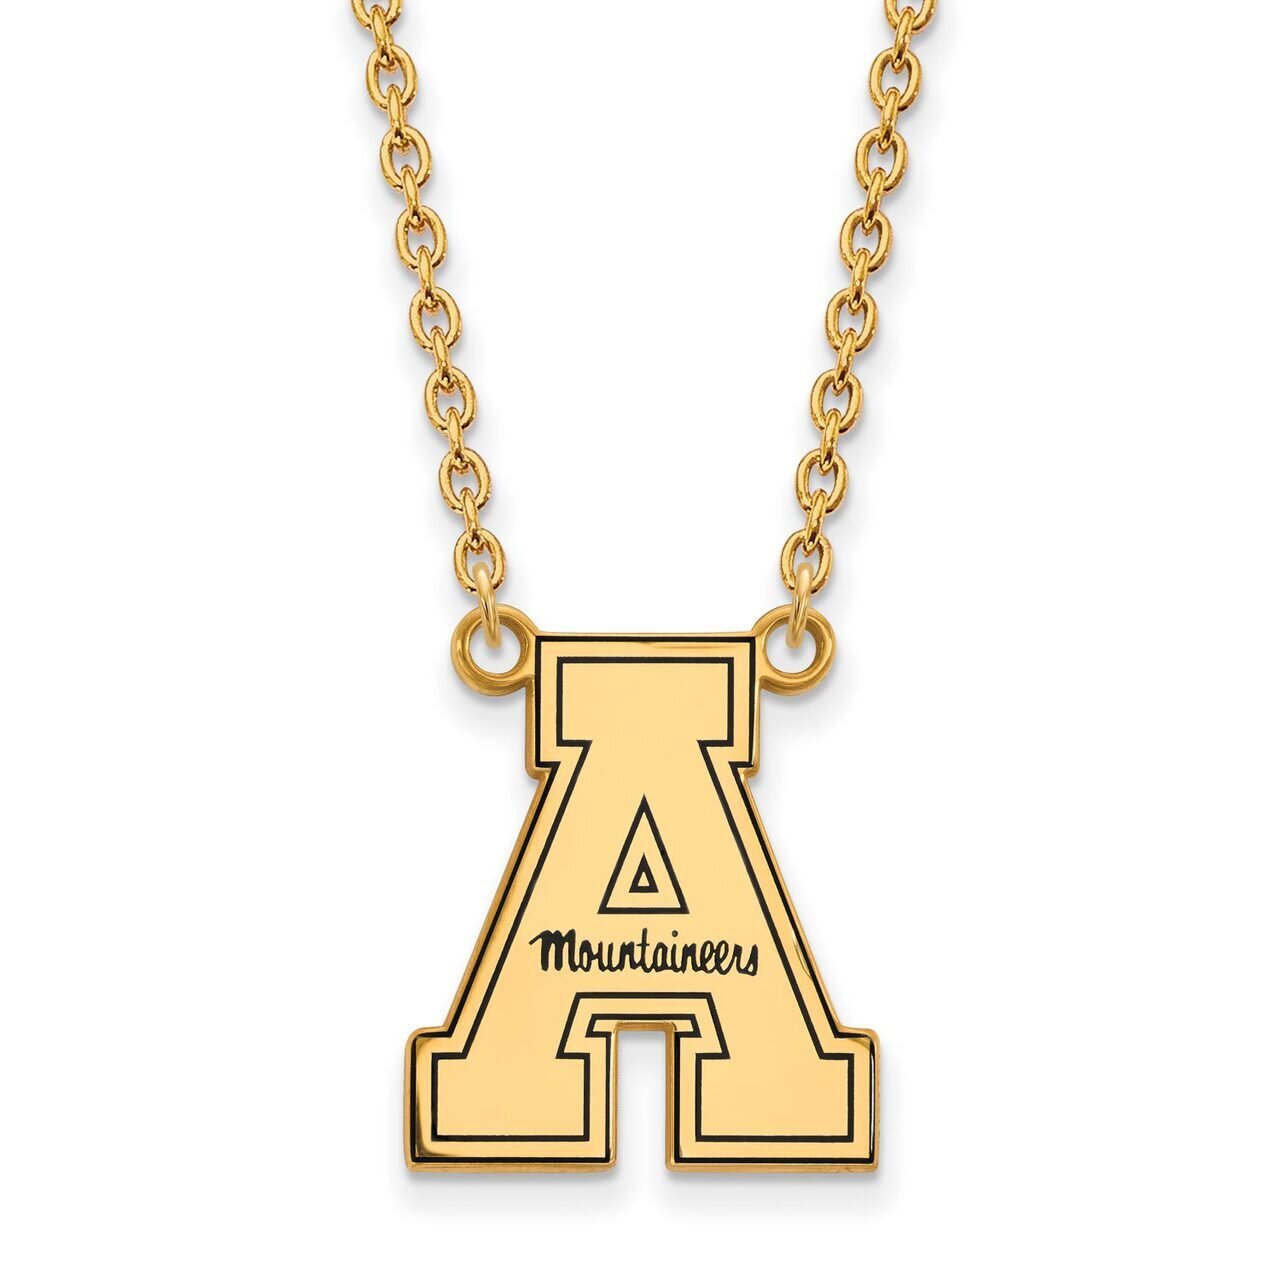 Appalachian State University Enamel Large Pendant with Chain Necklace Gold-plated Silver GP025APS-18